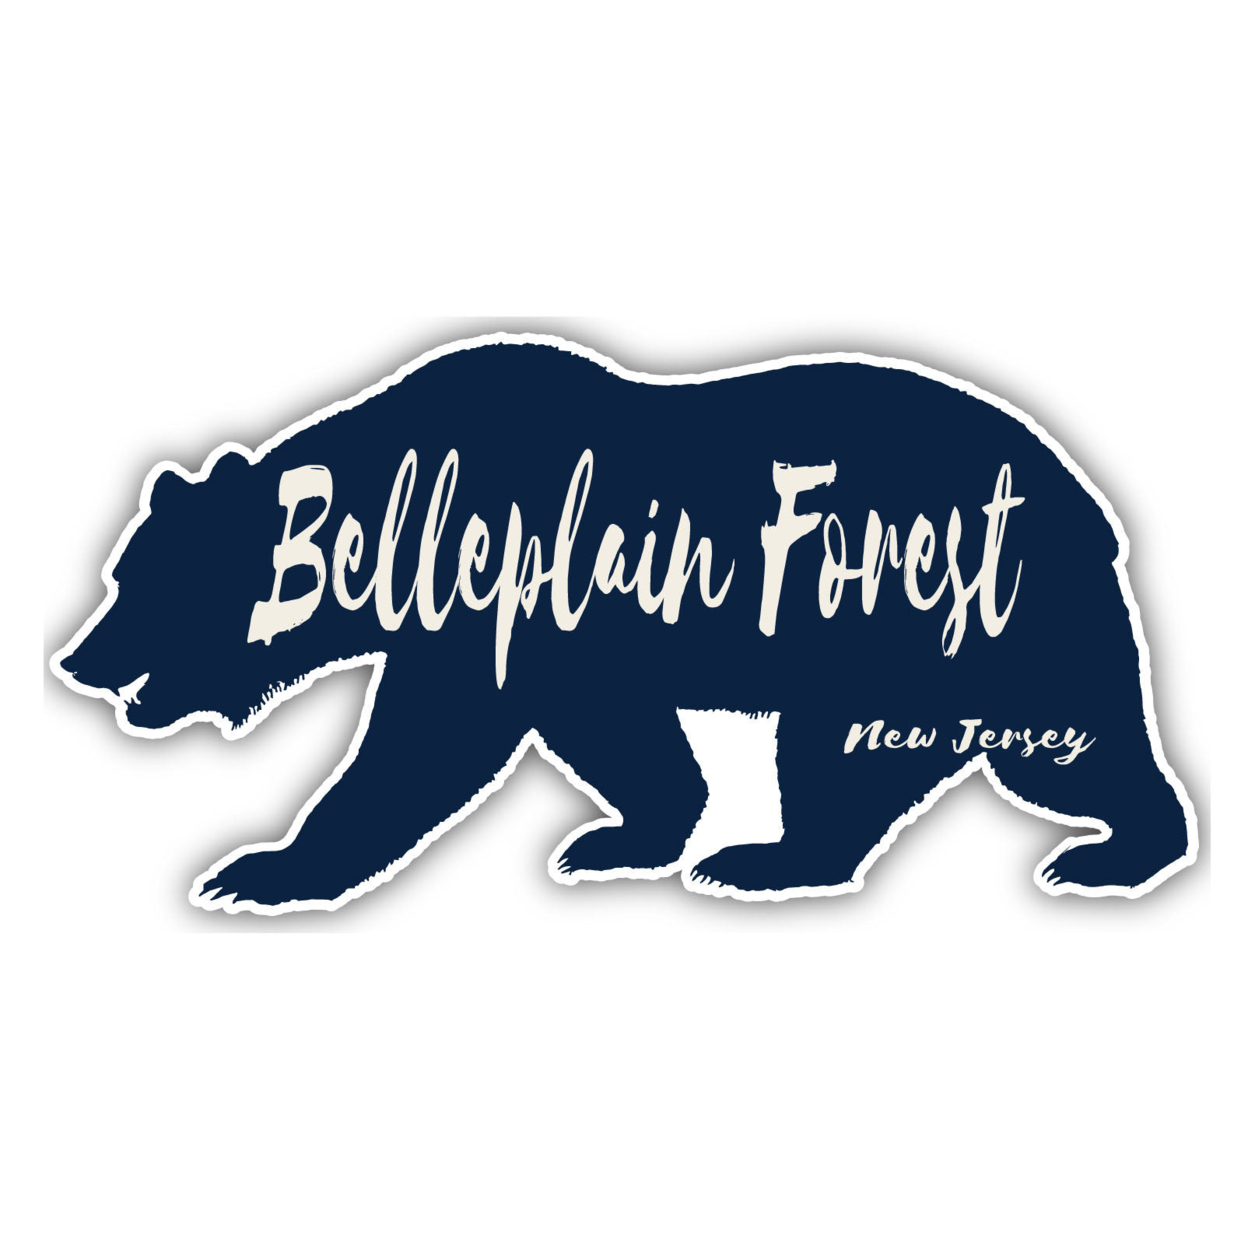 Belleplain Forest New Jersey Souvenir Decorative Stickers (Choose Theme And Size) - 4-Pack, 8-Inch, Bear